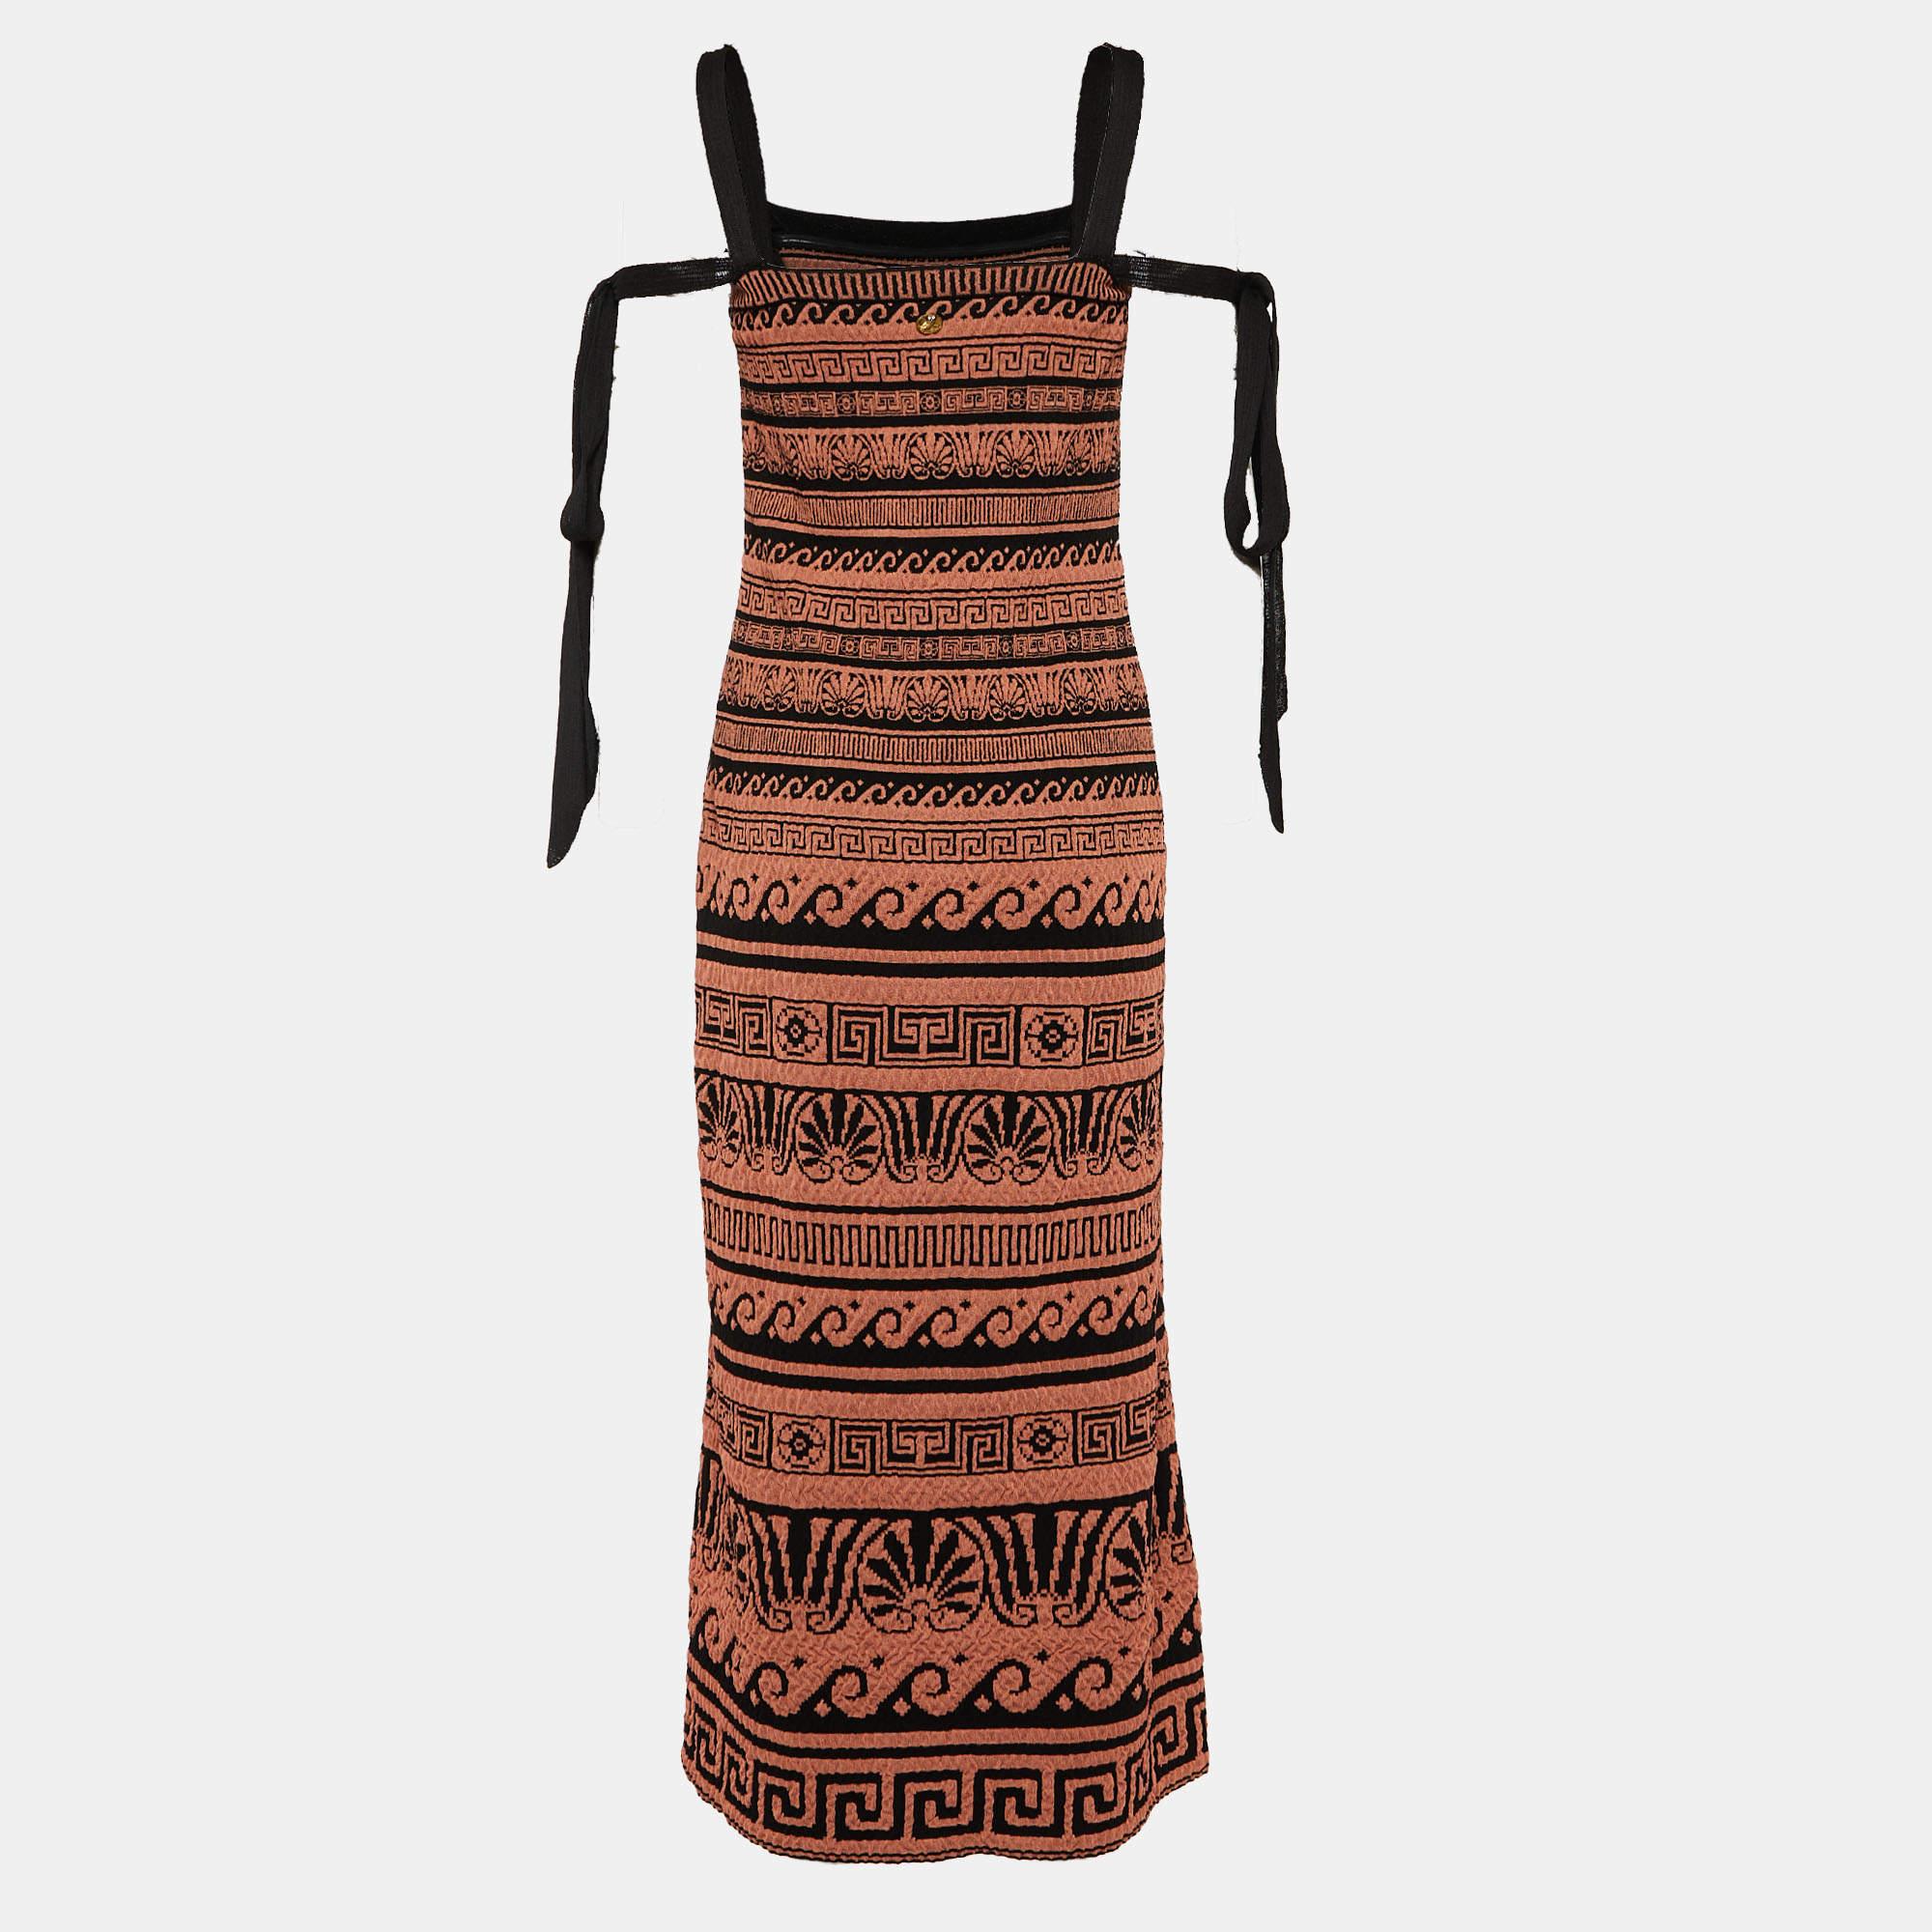 An exquisite fusion of class and grace, this Chanel dress will lend you endless style. This piece is nothing but classic fashion. Detailed with lovely patterns all over, the maxi dress has tie details and a gorgeous fit.

